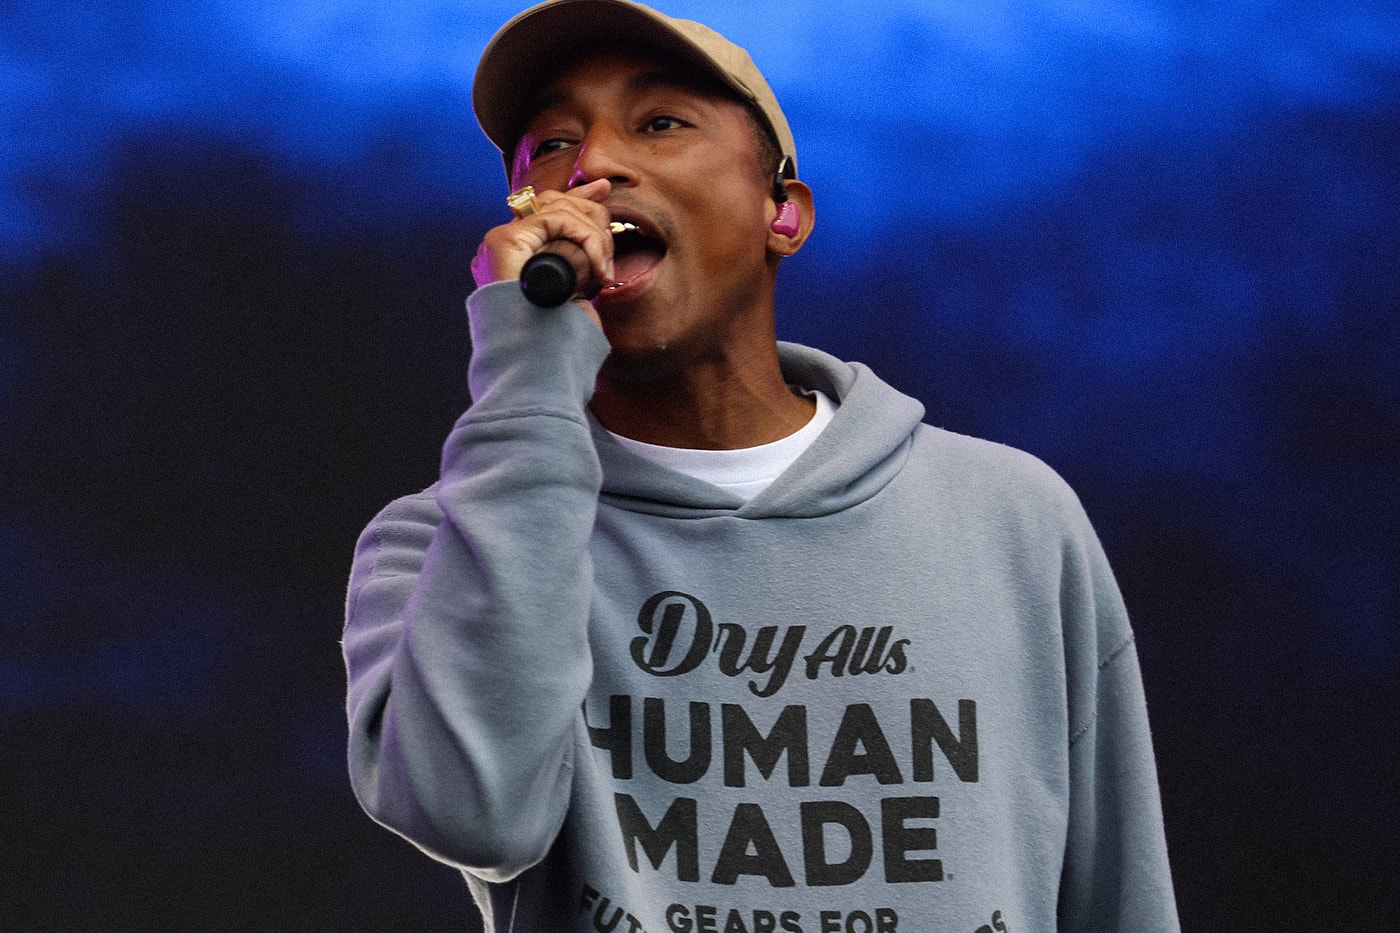 Pharrell seeks transparency honesty justice statement Cousin Killed by Police donovan